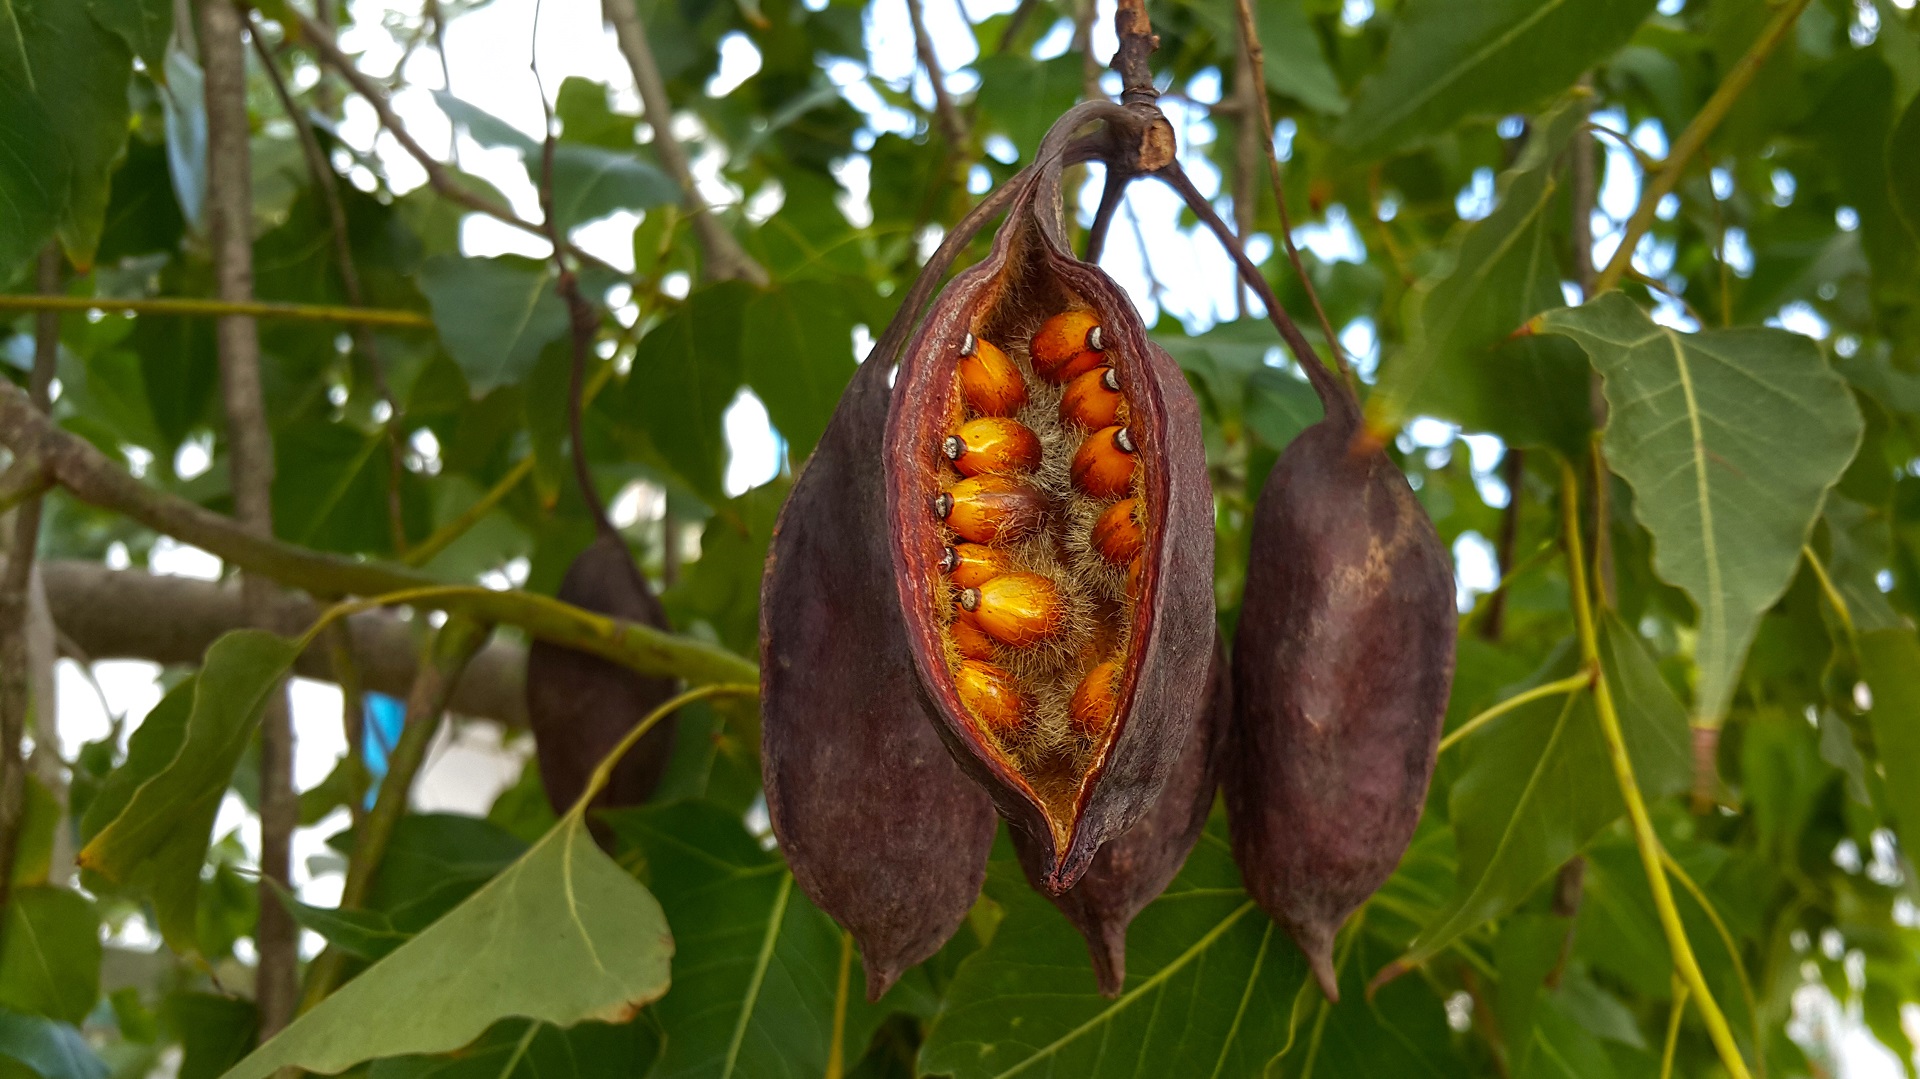 Seed pod from a black kurrajong tree that has opened to show orange seeds